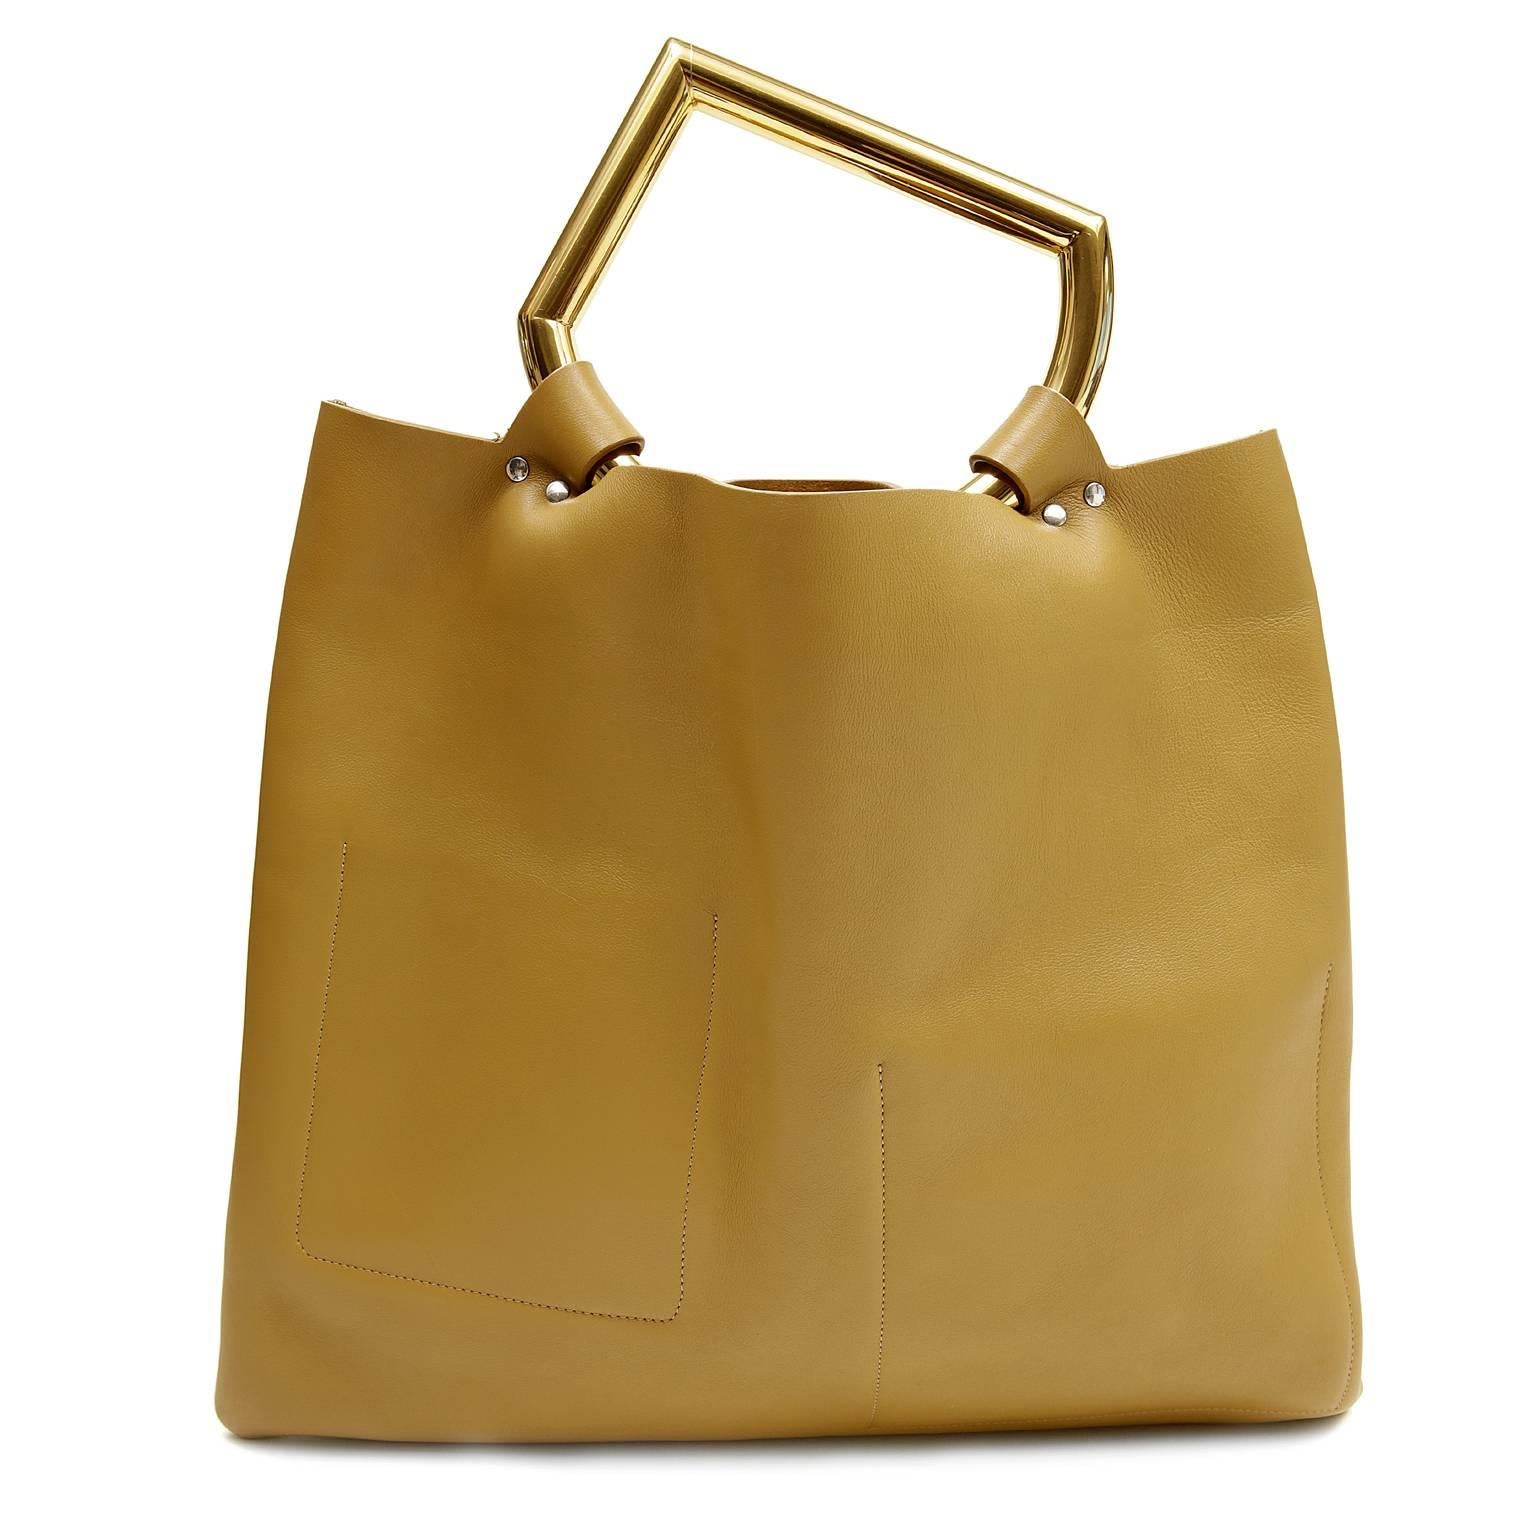 Celine Geometric Handle Runway Tote-  Pristine 
 The striking patch pocket design is neutral with a slim silhouette; perfect for every day year round enjoyment. 
 
Neutral dark goldenrod (a  golden beige color) calfskin has three exterior patch